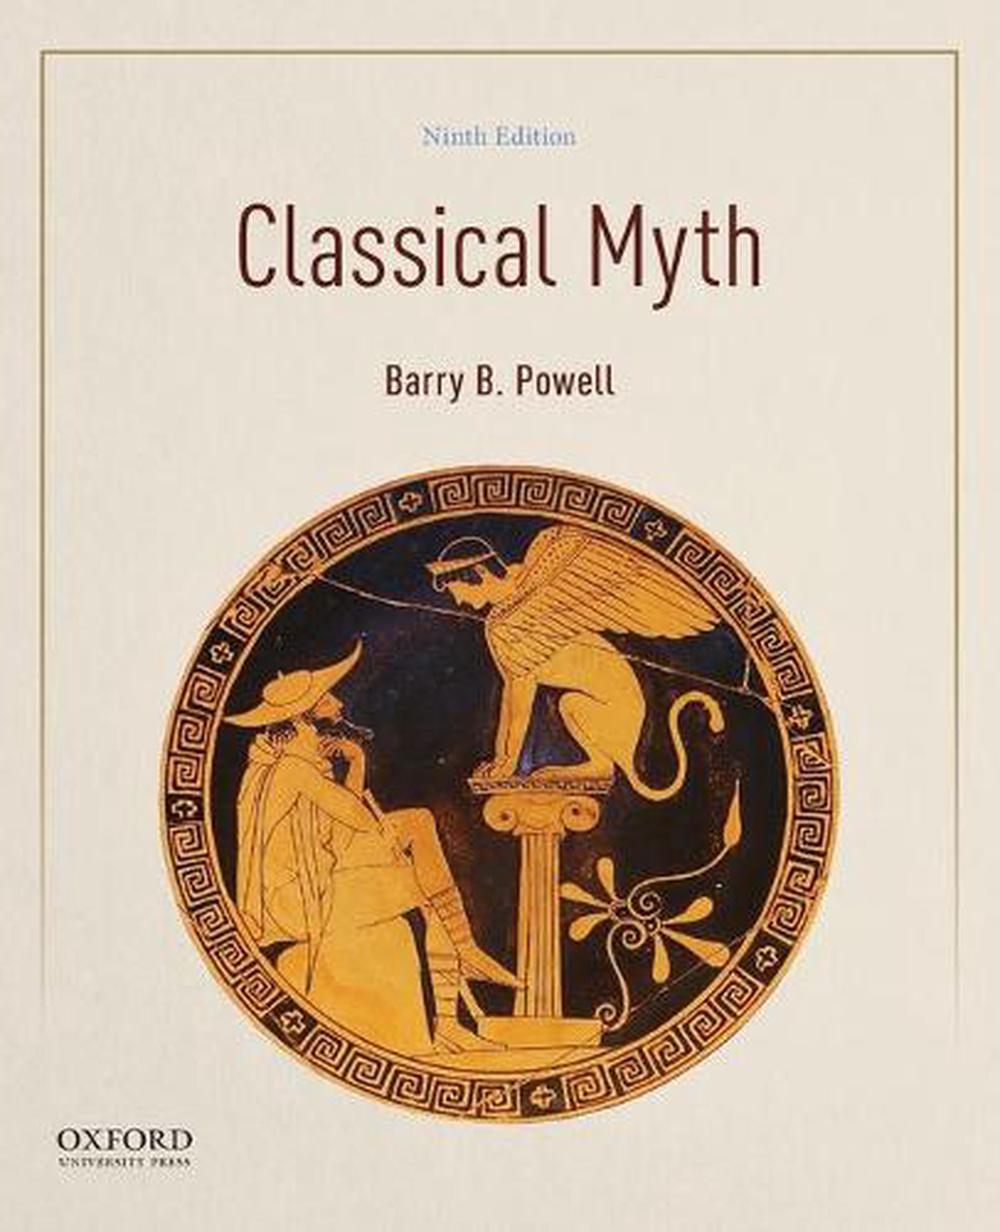 9th　The　online　Edition　Paperback,　by　9780197527986　at　Buy　Barry　B.　Powell,　Nile　Classical　Myth,